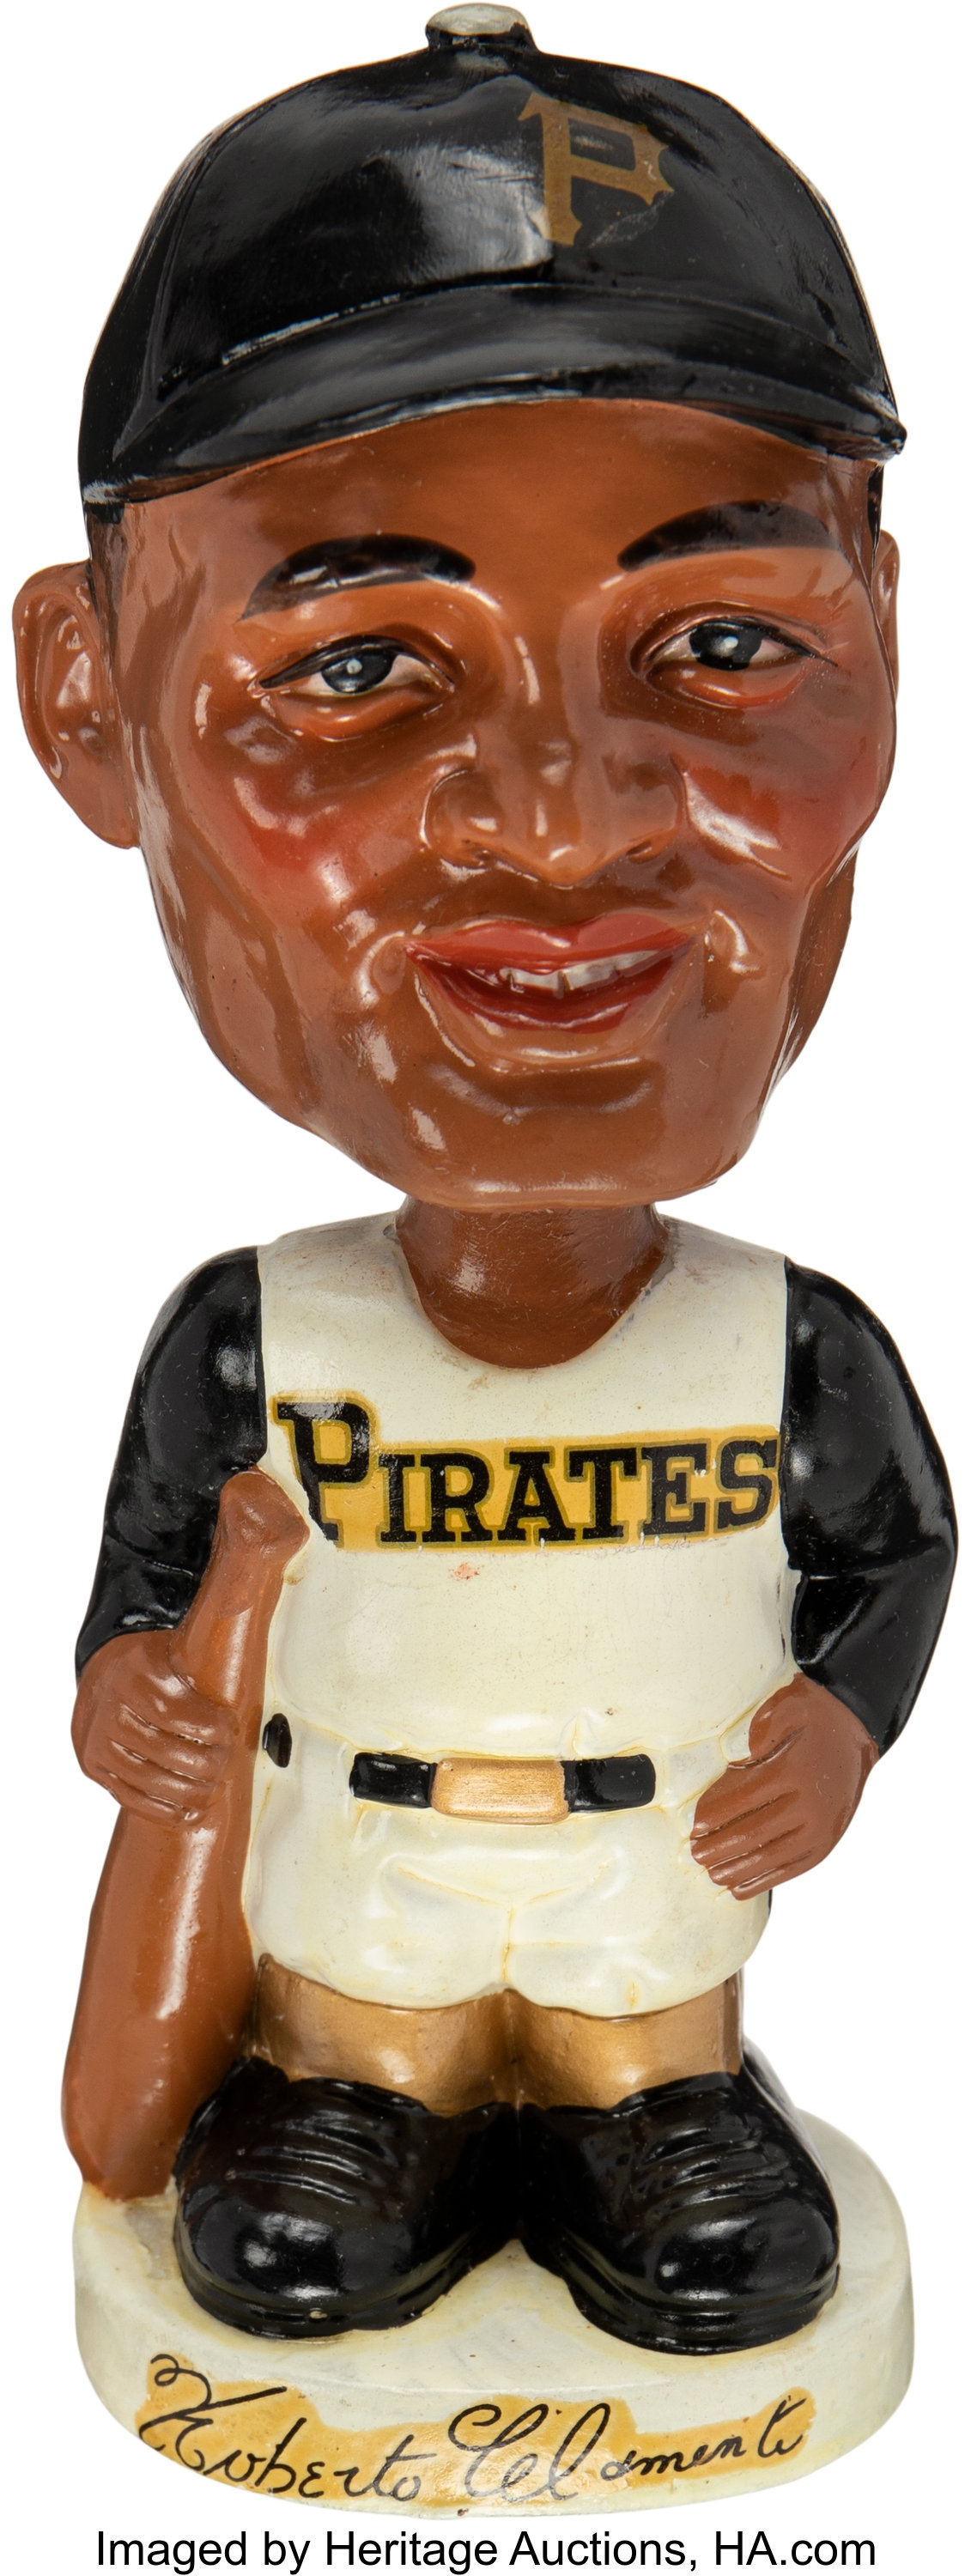 World's most valuable bobblehead doll to sell at Heritage Auctions